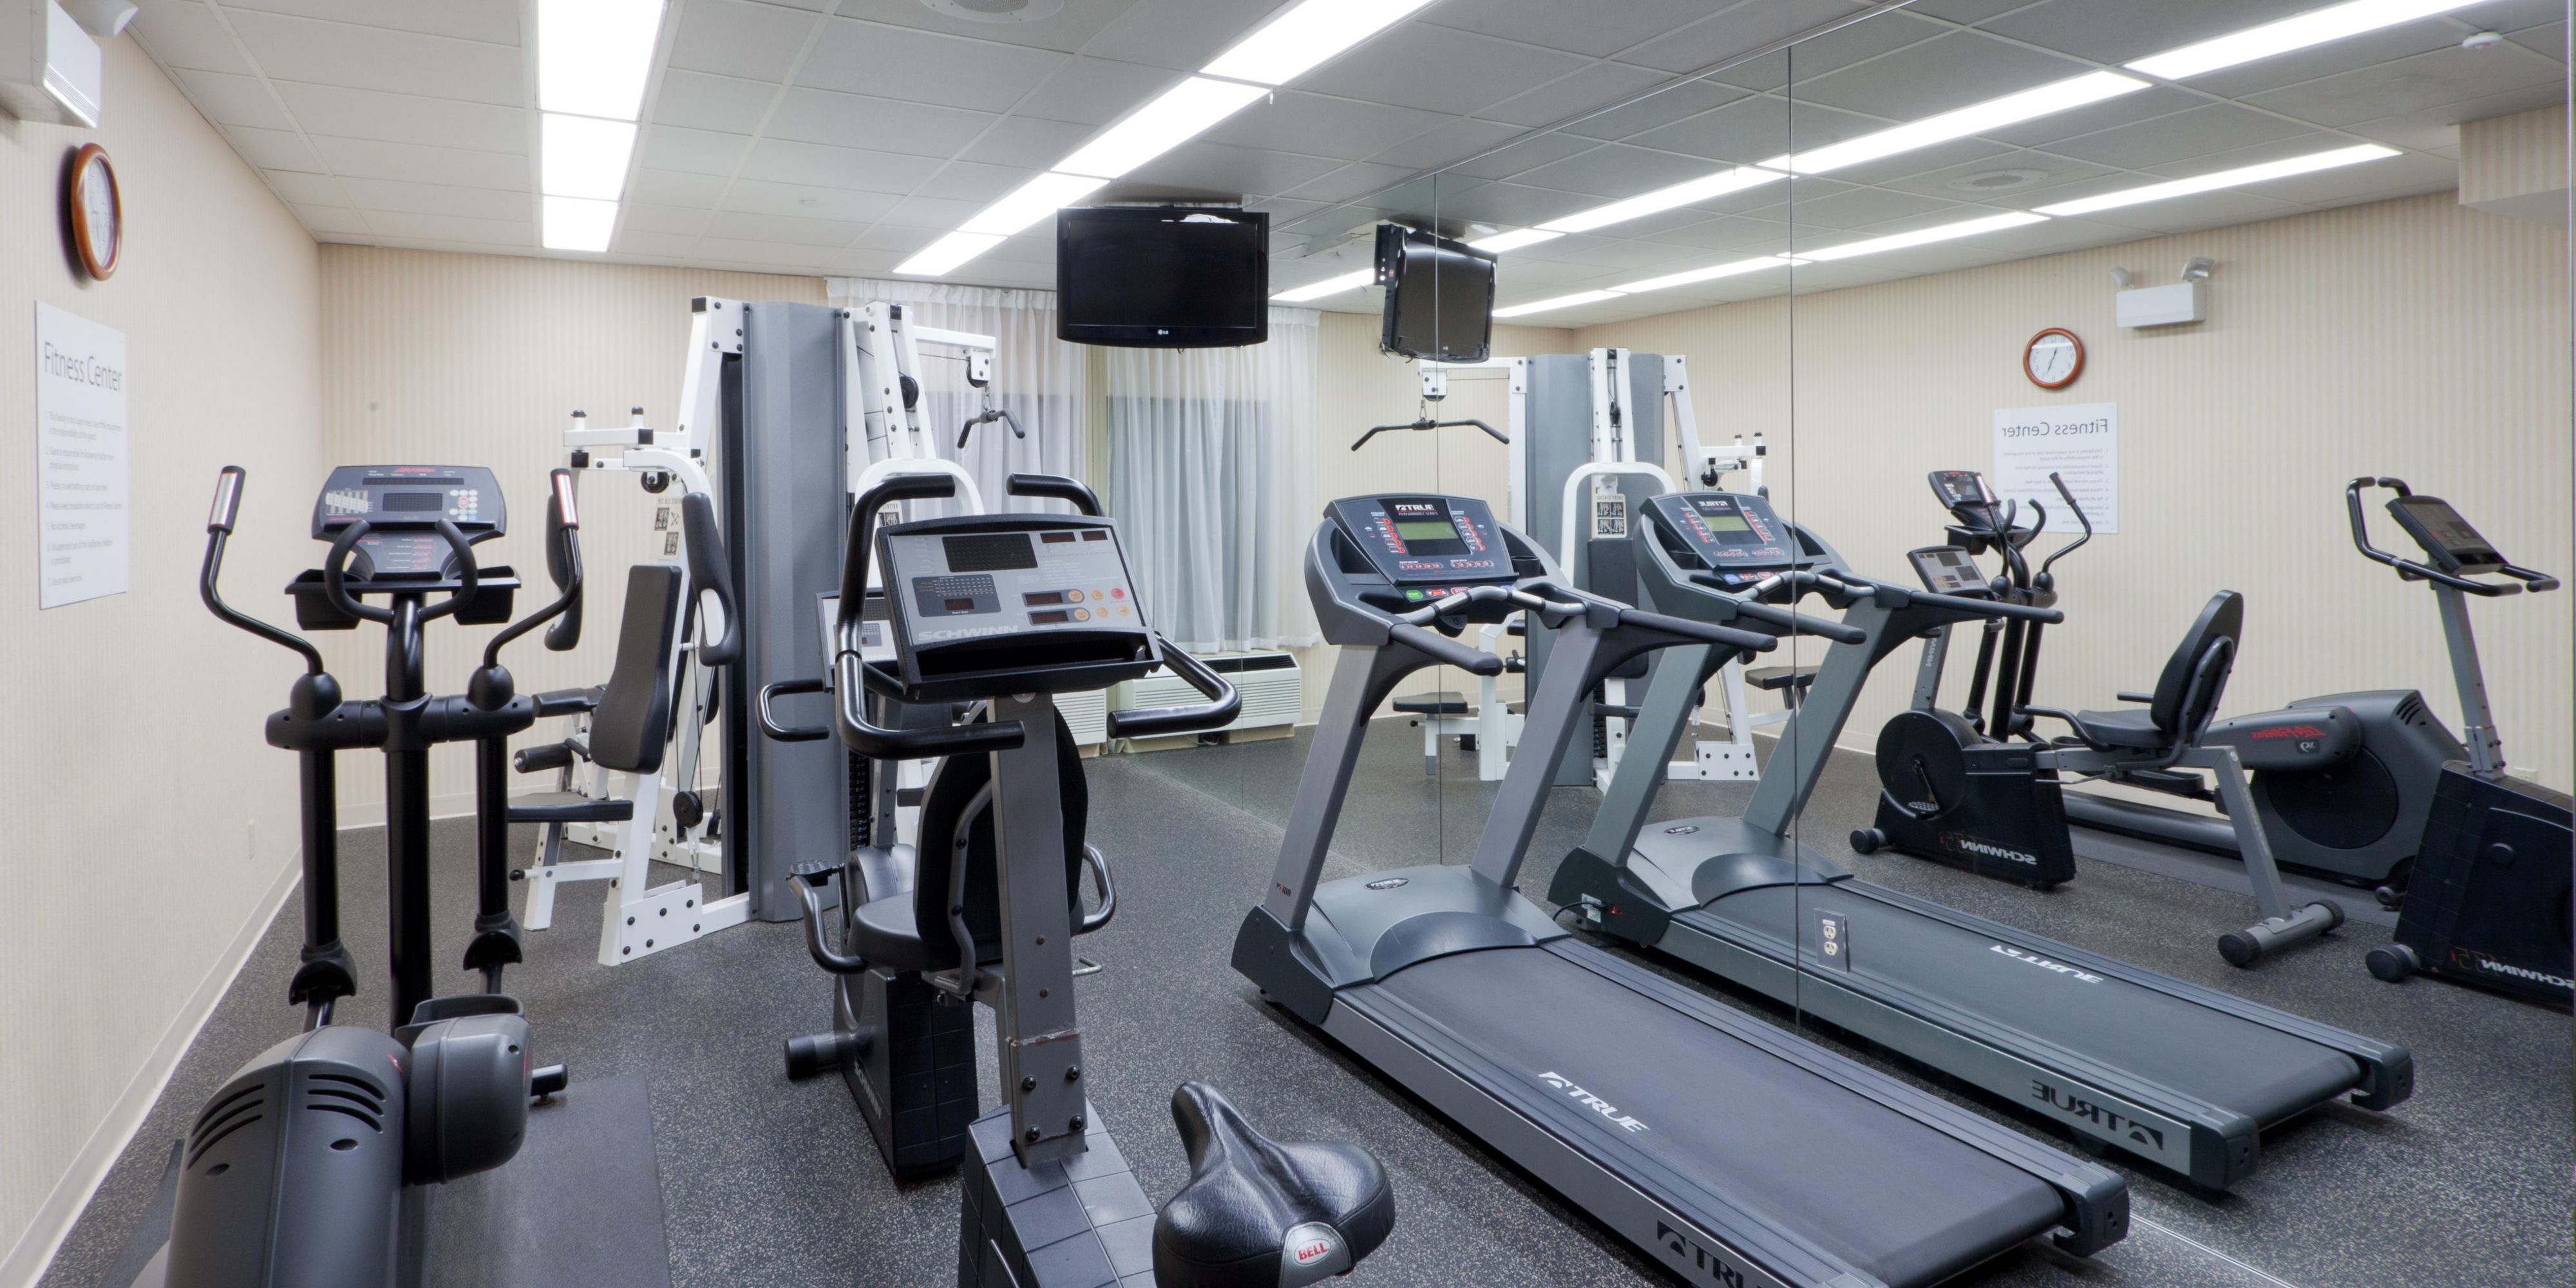 Get your sweat on in our complimentary, fully equipped fitness center with a tread mill, stationary bike, free weights, weight bench and elliptical machines open 24 hours for your convenience.
